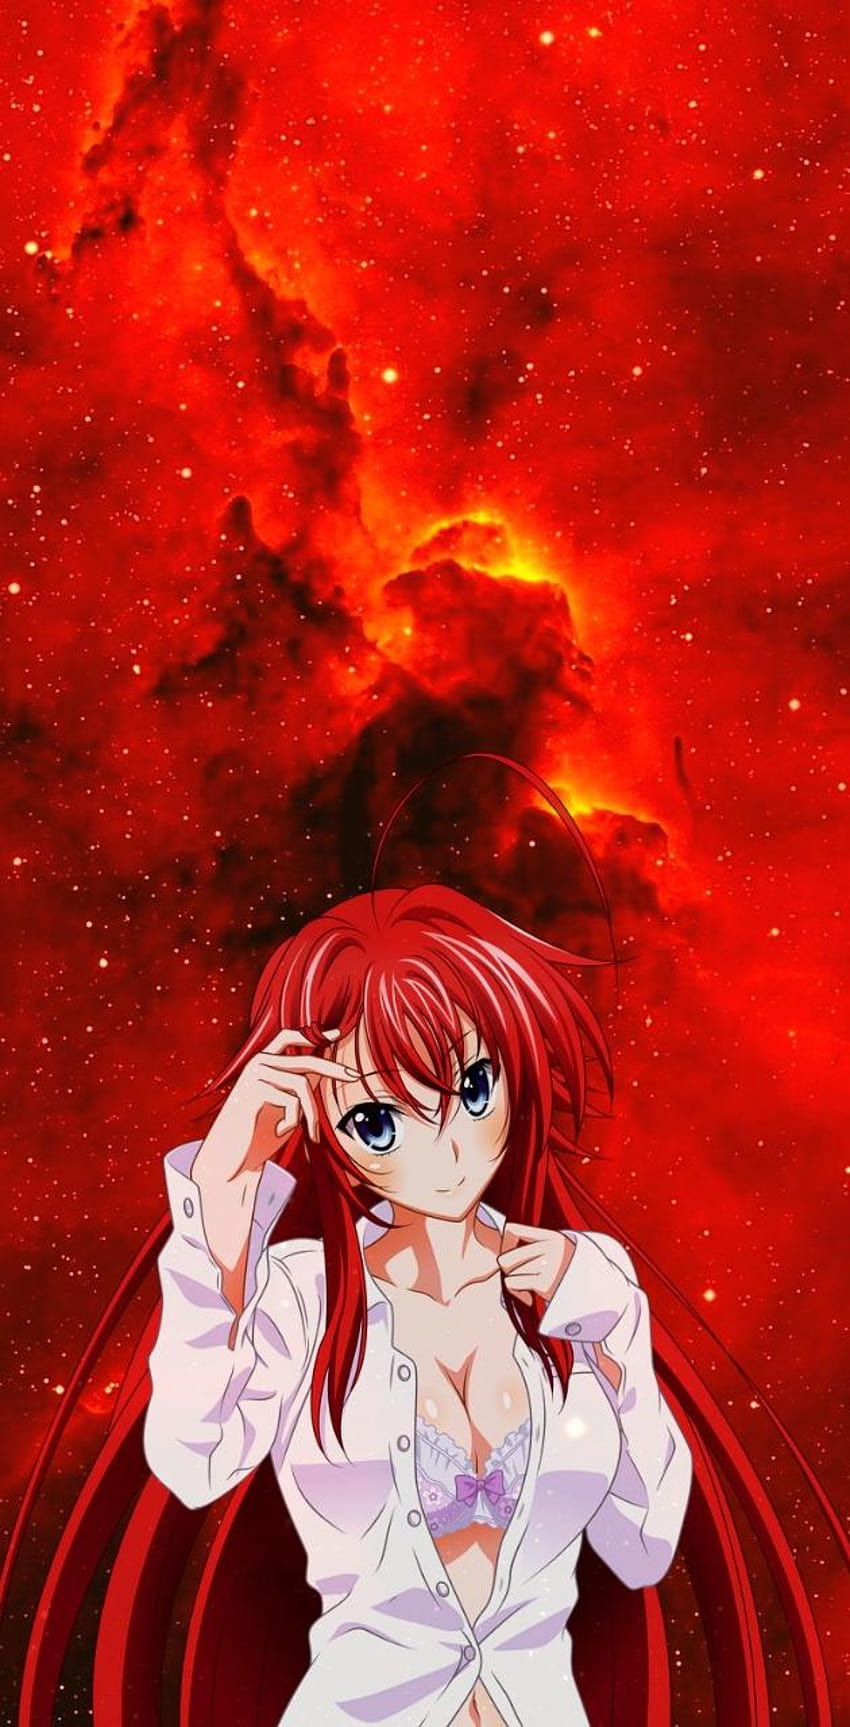 Rias Gremory Wallpapers 73 images